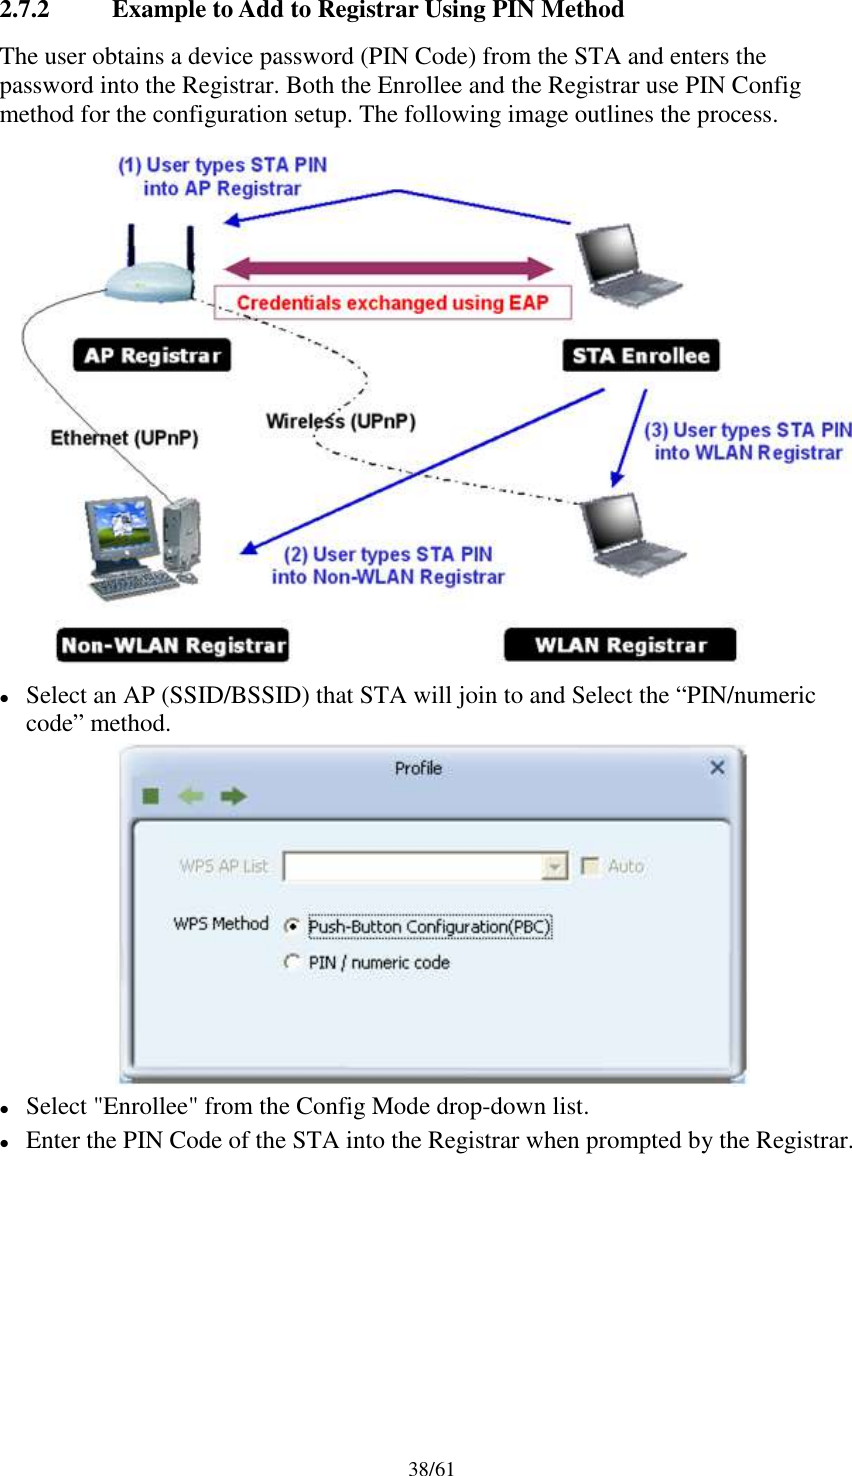 38/612.7.2 Example to Add to Registrar Using PIN MethodThe user obtains a device password (PIN Code) from the STA and enters thepassword into the Registrar. Both the Enrollee and the Registrar use PIN Configmethod for the configuration setup. The following image outlines the process.Select an AP (SSID/BSSID) that STA will join to and Select the “PIN/numericcode” method.Select &quot;Enrollee&quot; from the Config Mode drop-down list.Enter the PIN Code of the STA into the Registrar when prompted by the Registrar.